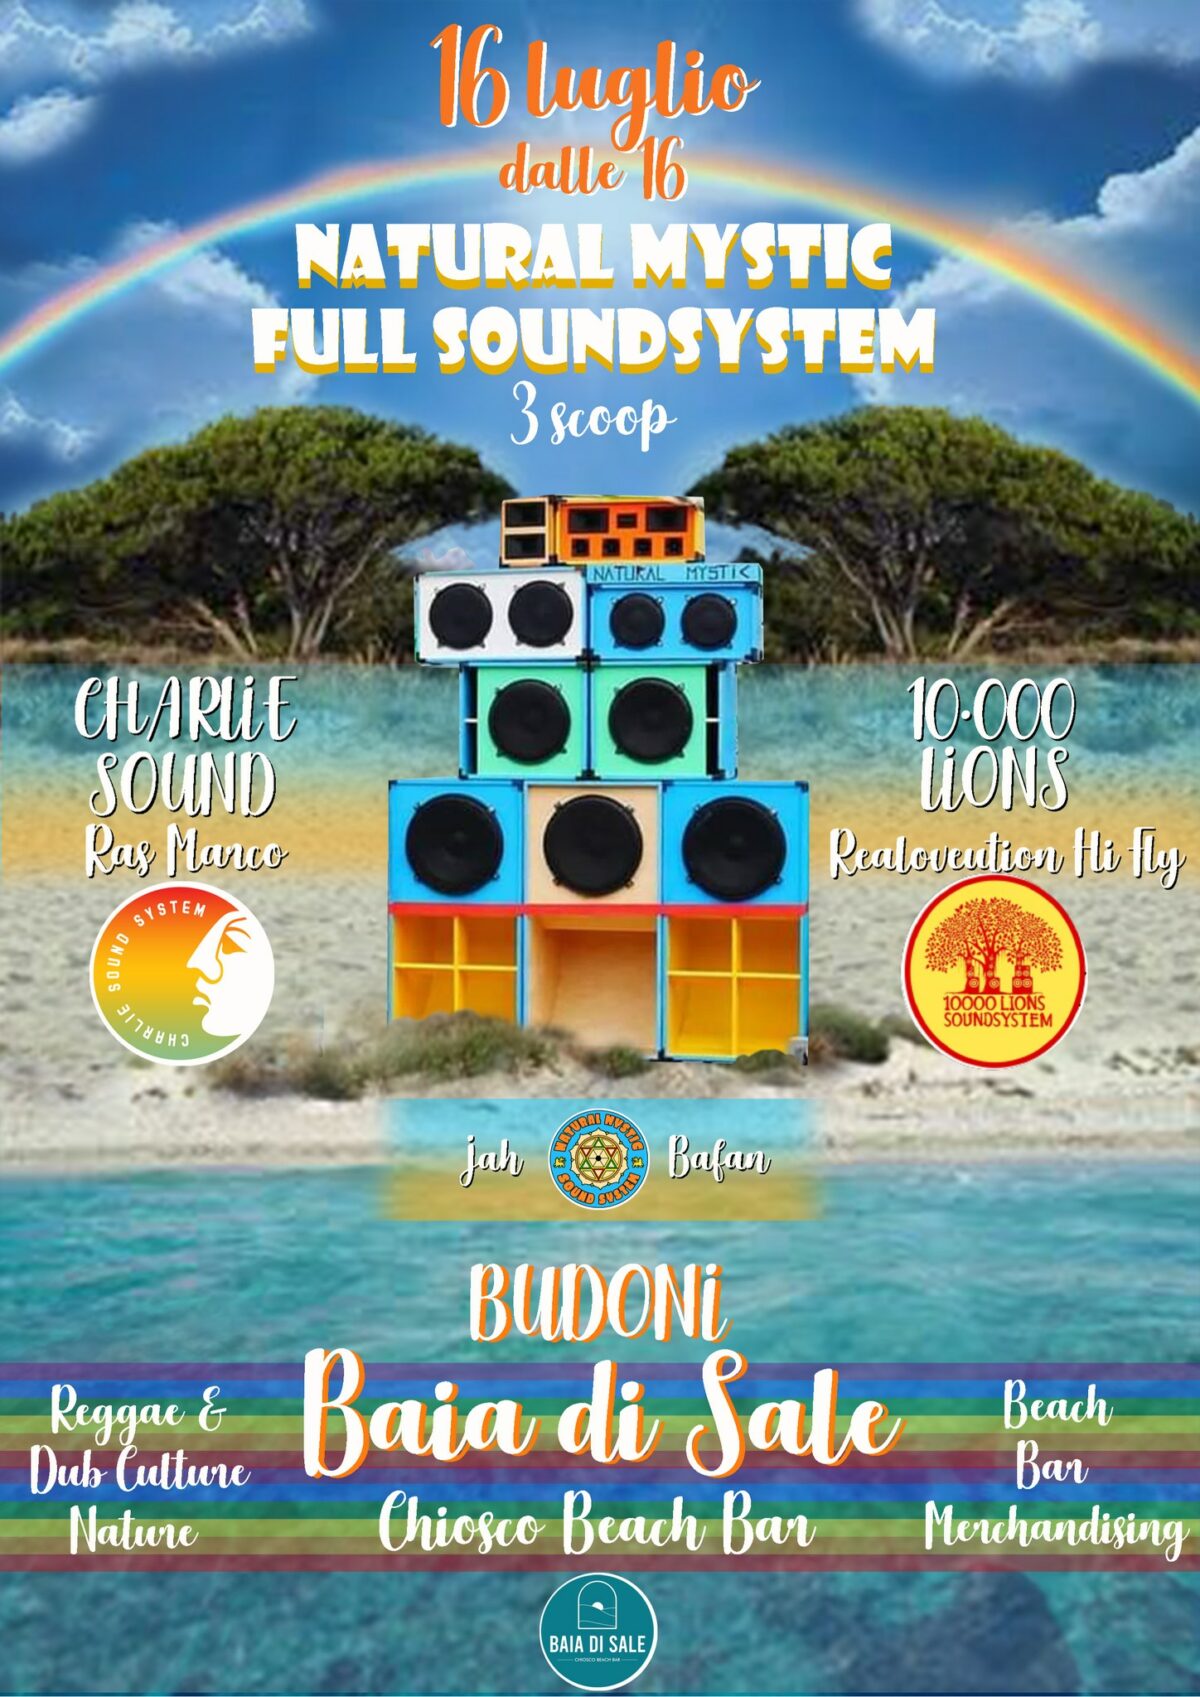 Natural Mystic Full Sound System feat 10,000 Lions, Charlie Sound & Jah Bafan